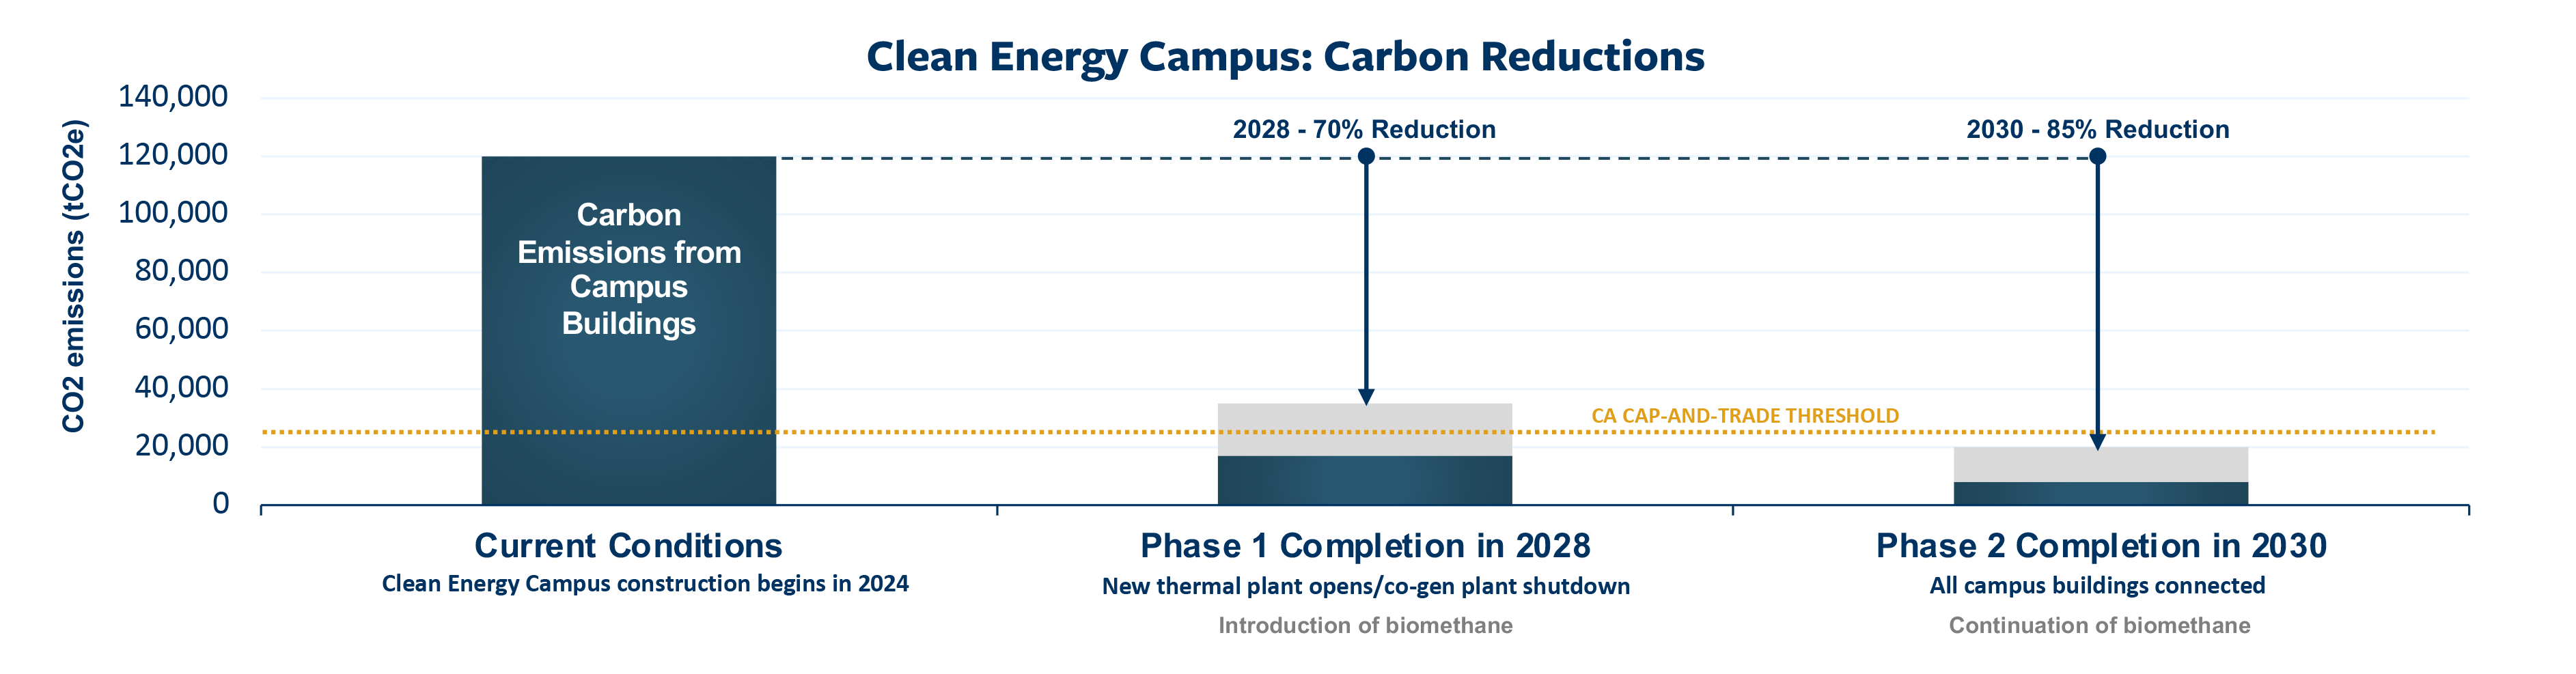 2022 Clean Energy Campus carbon reductions